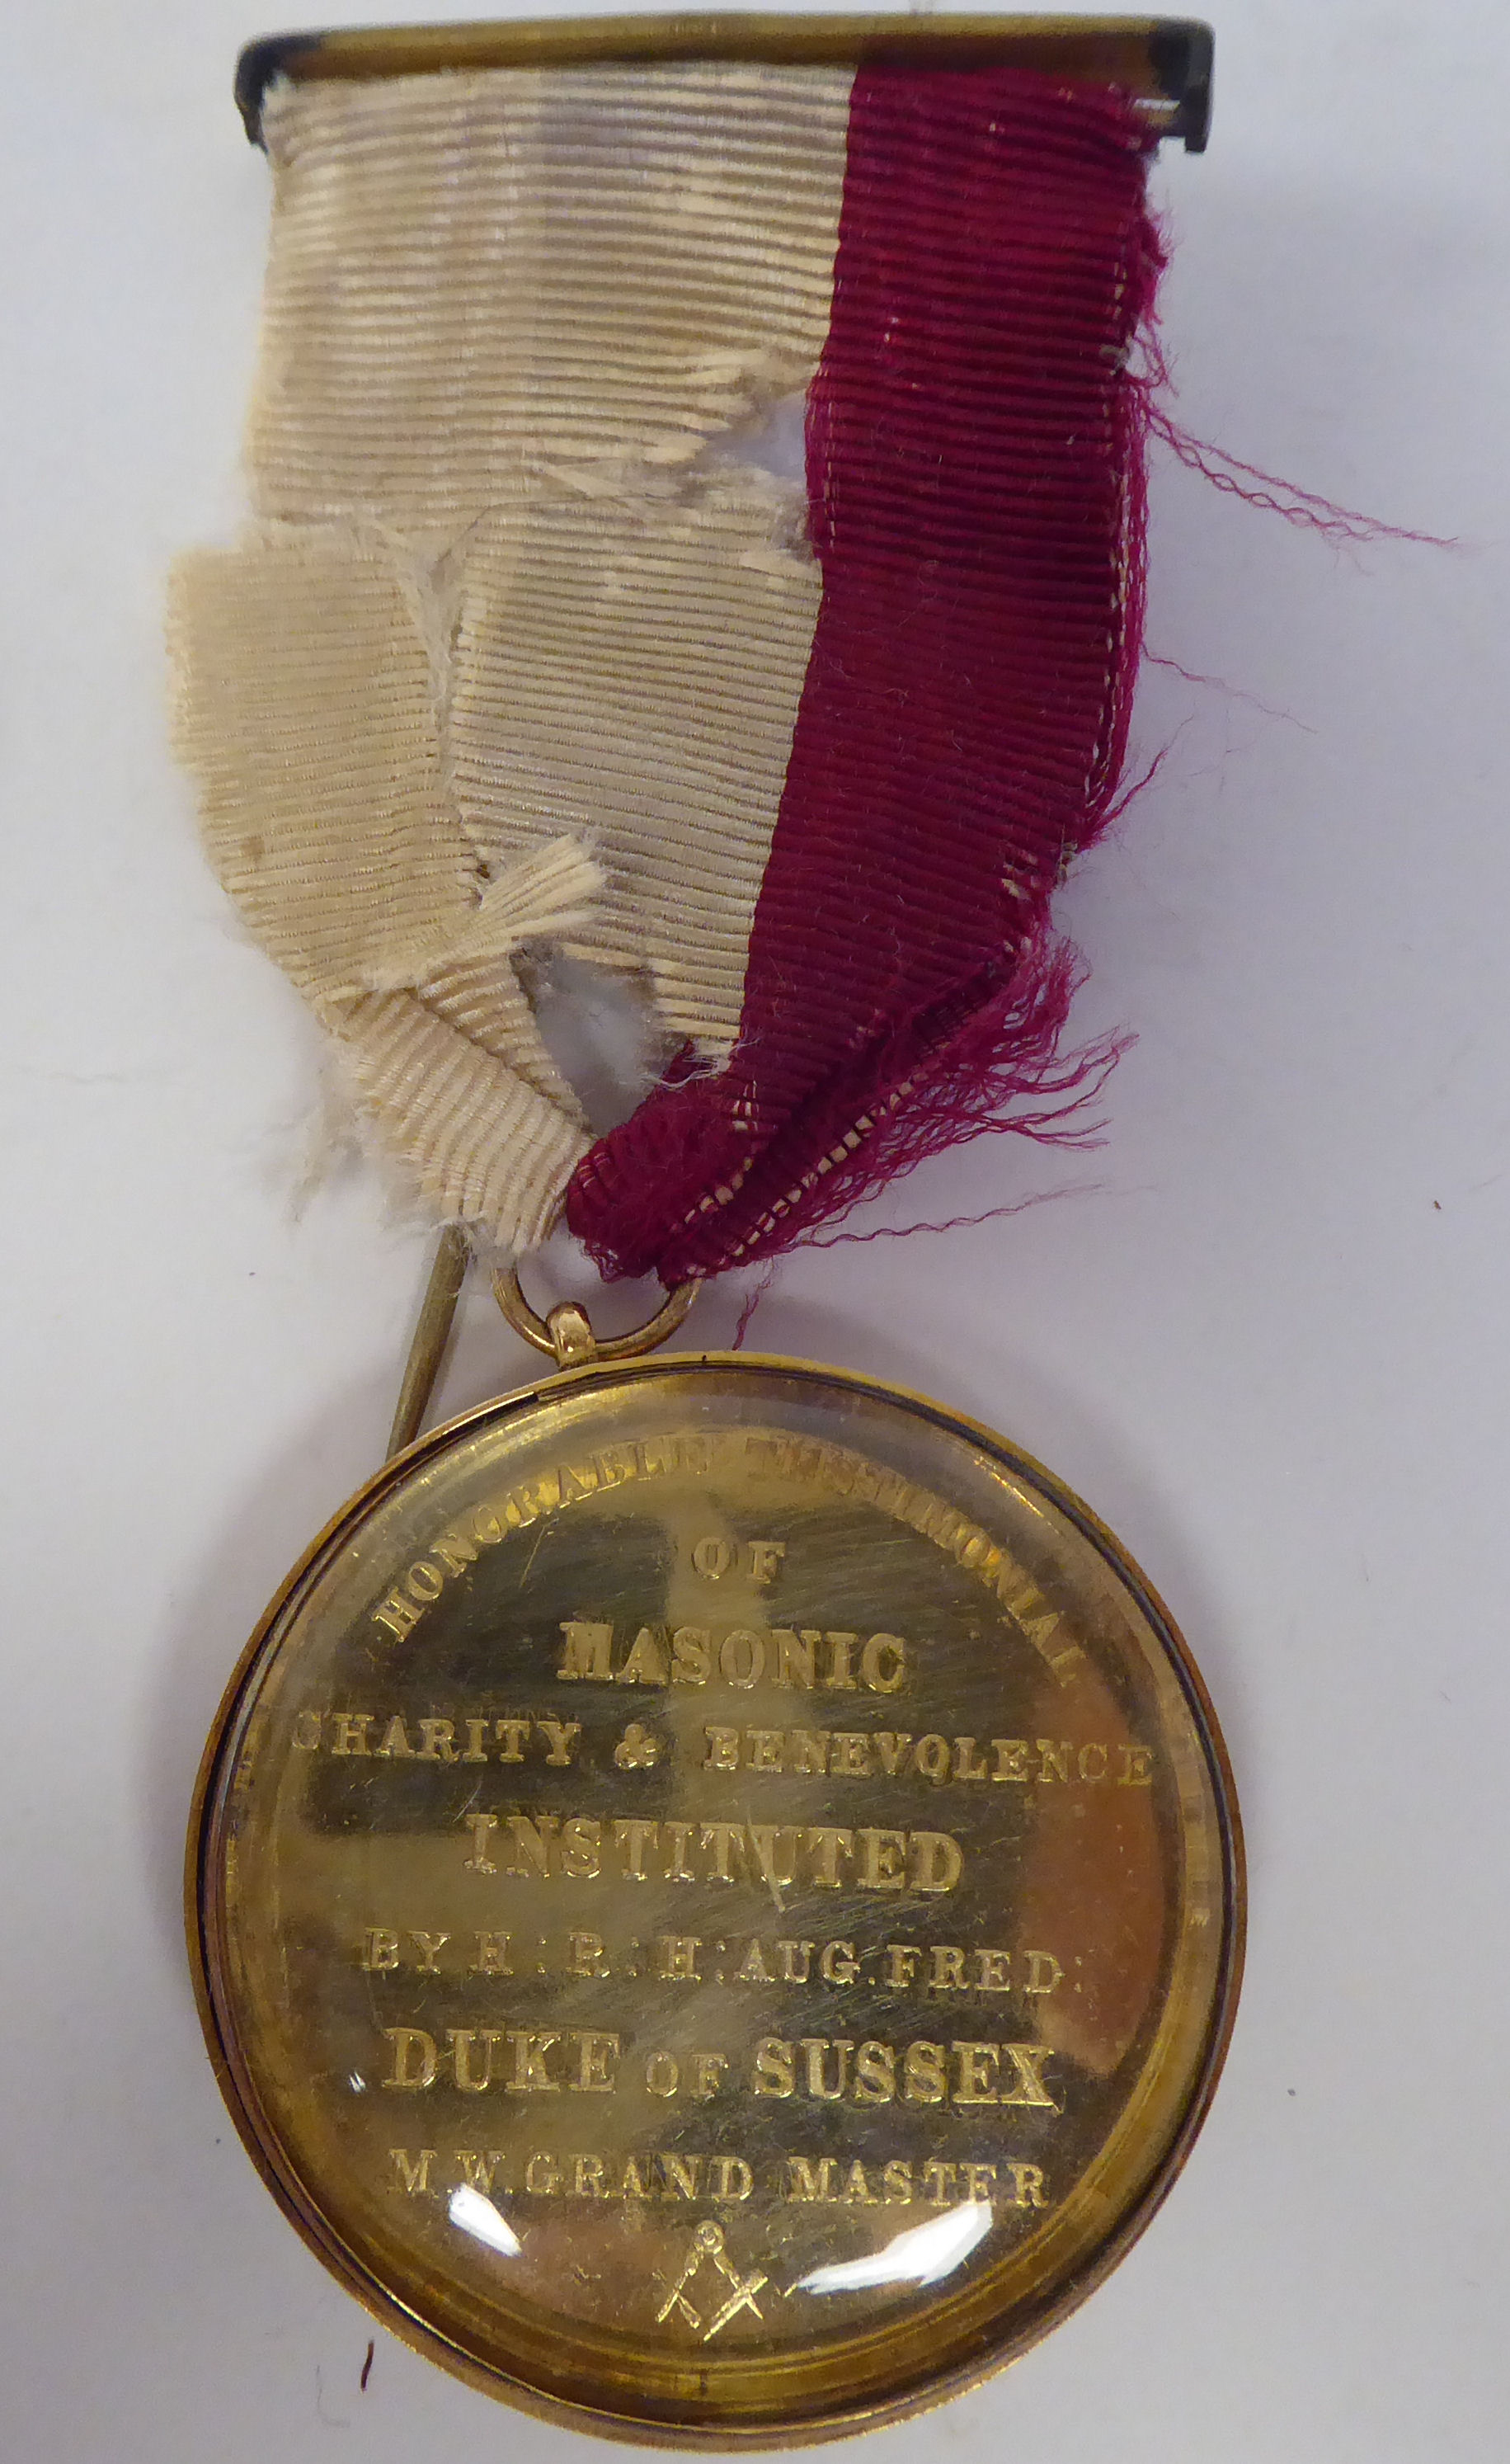 An Honourable Testimonial of Masonic Charity & Benevolence medal, in a 15ct gold mount, inscribed